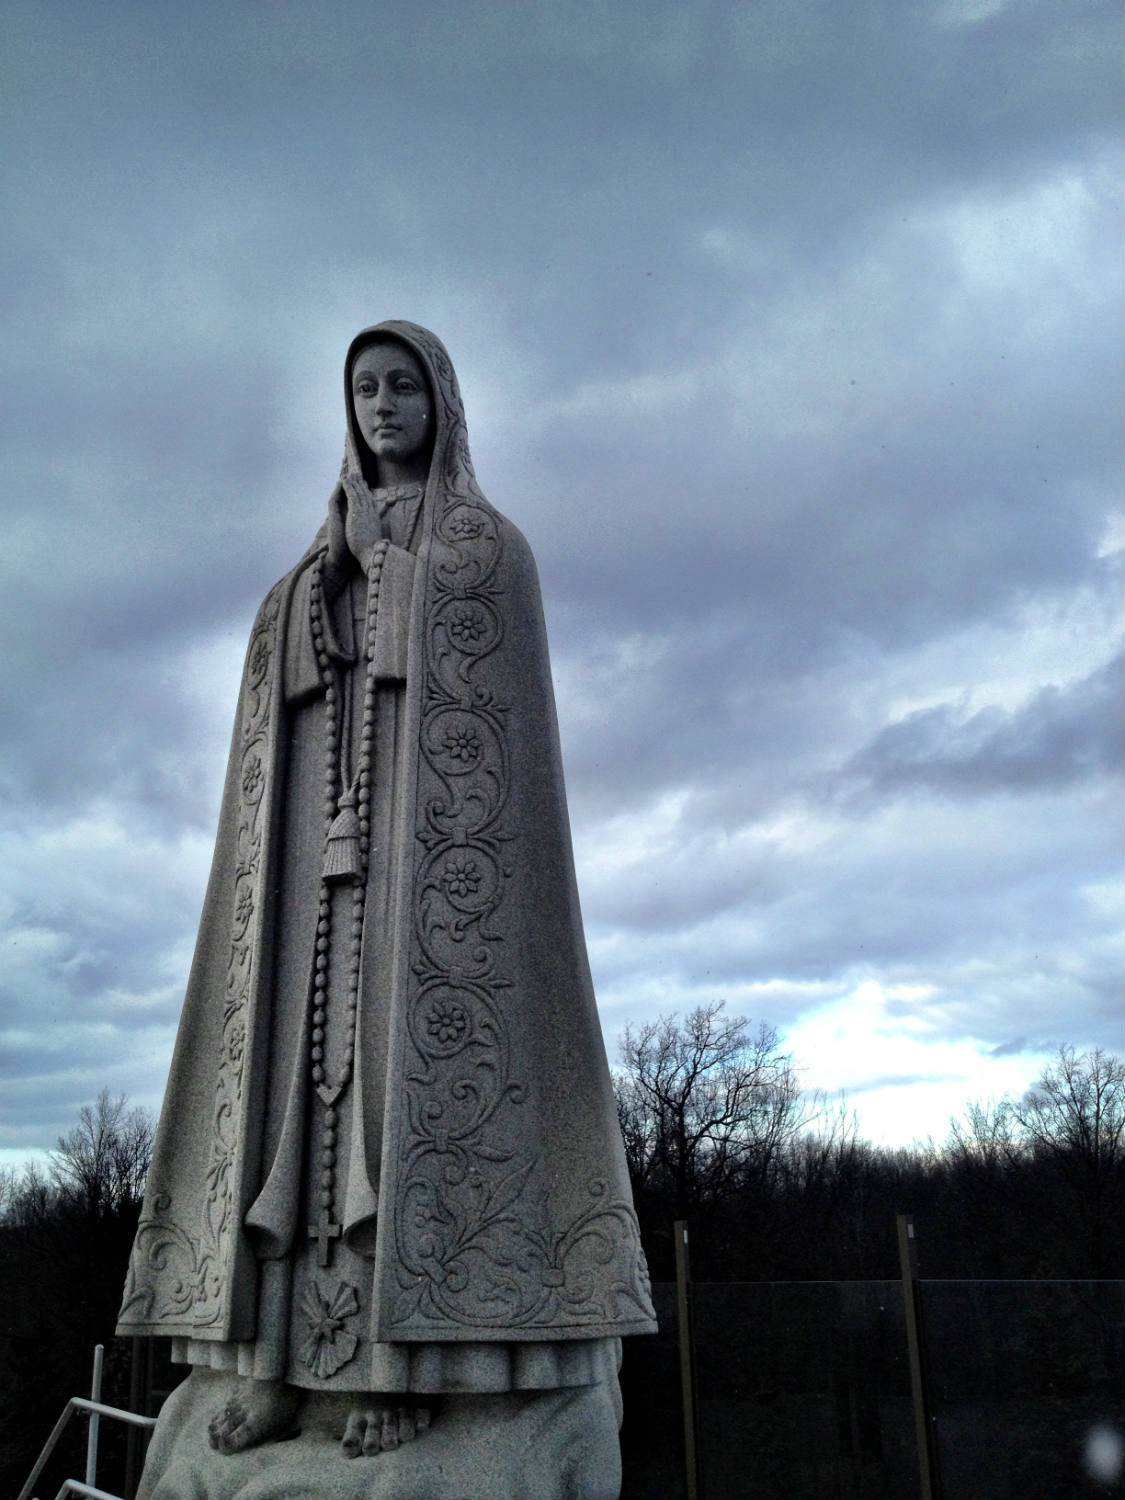 Our Lady of Fatima Statue in Lewiston, New York